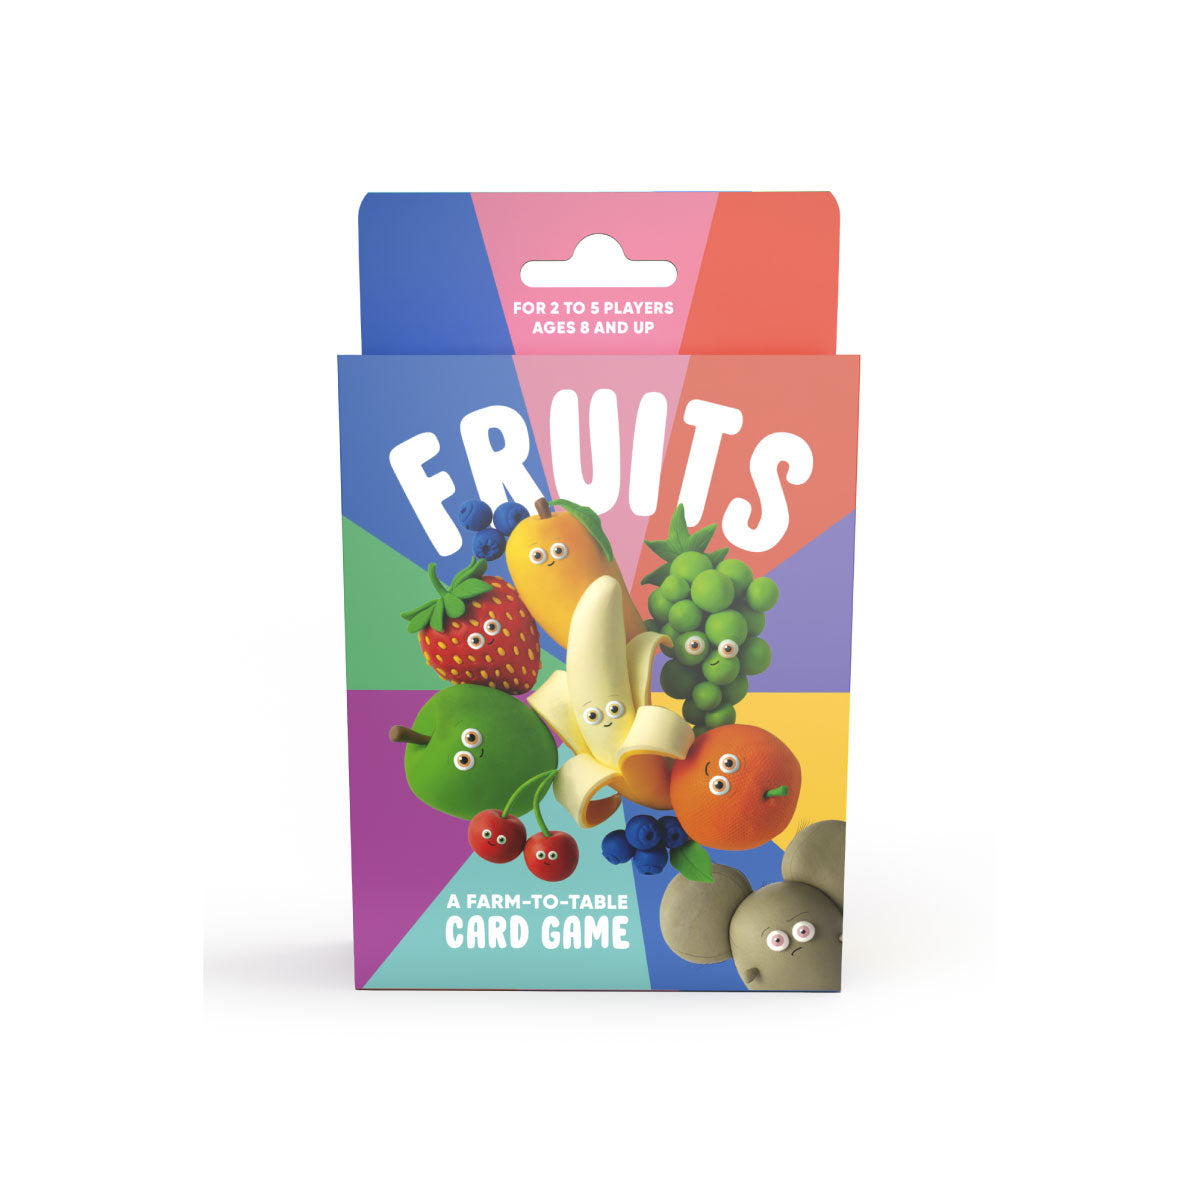 Fruits Farm to Table Card Game from Penguin Random House